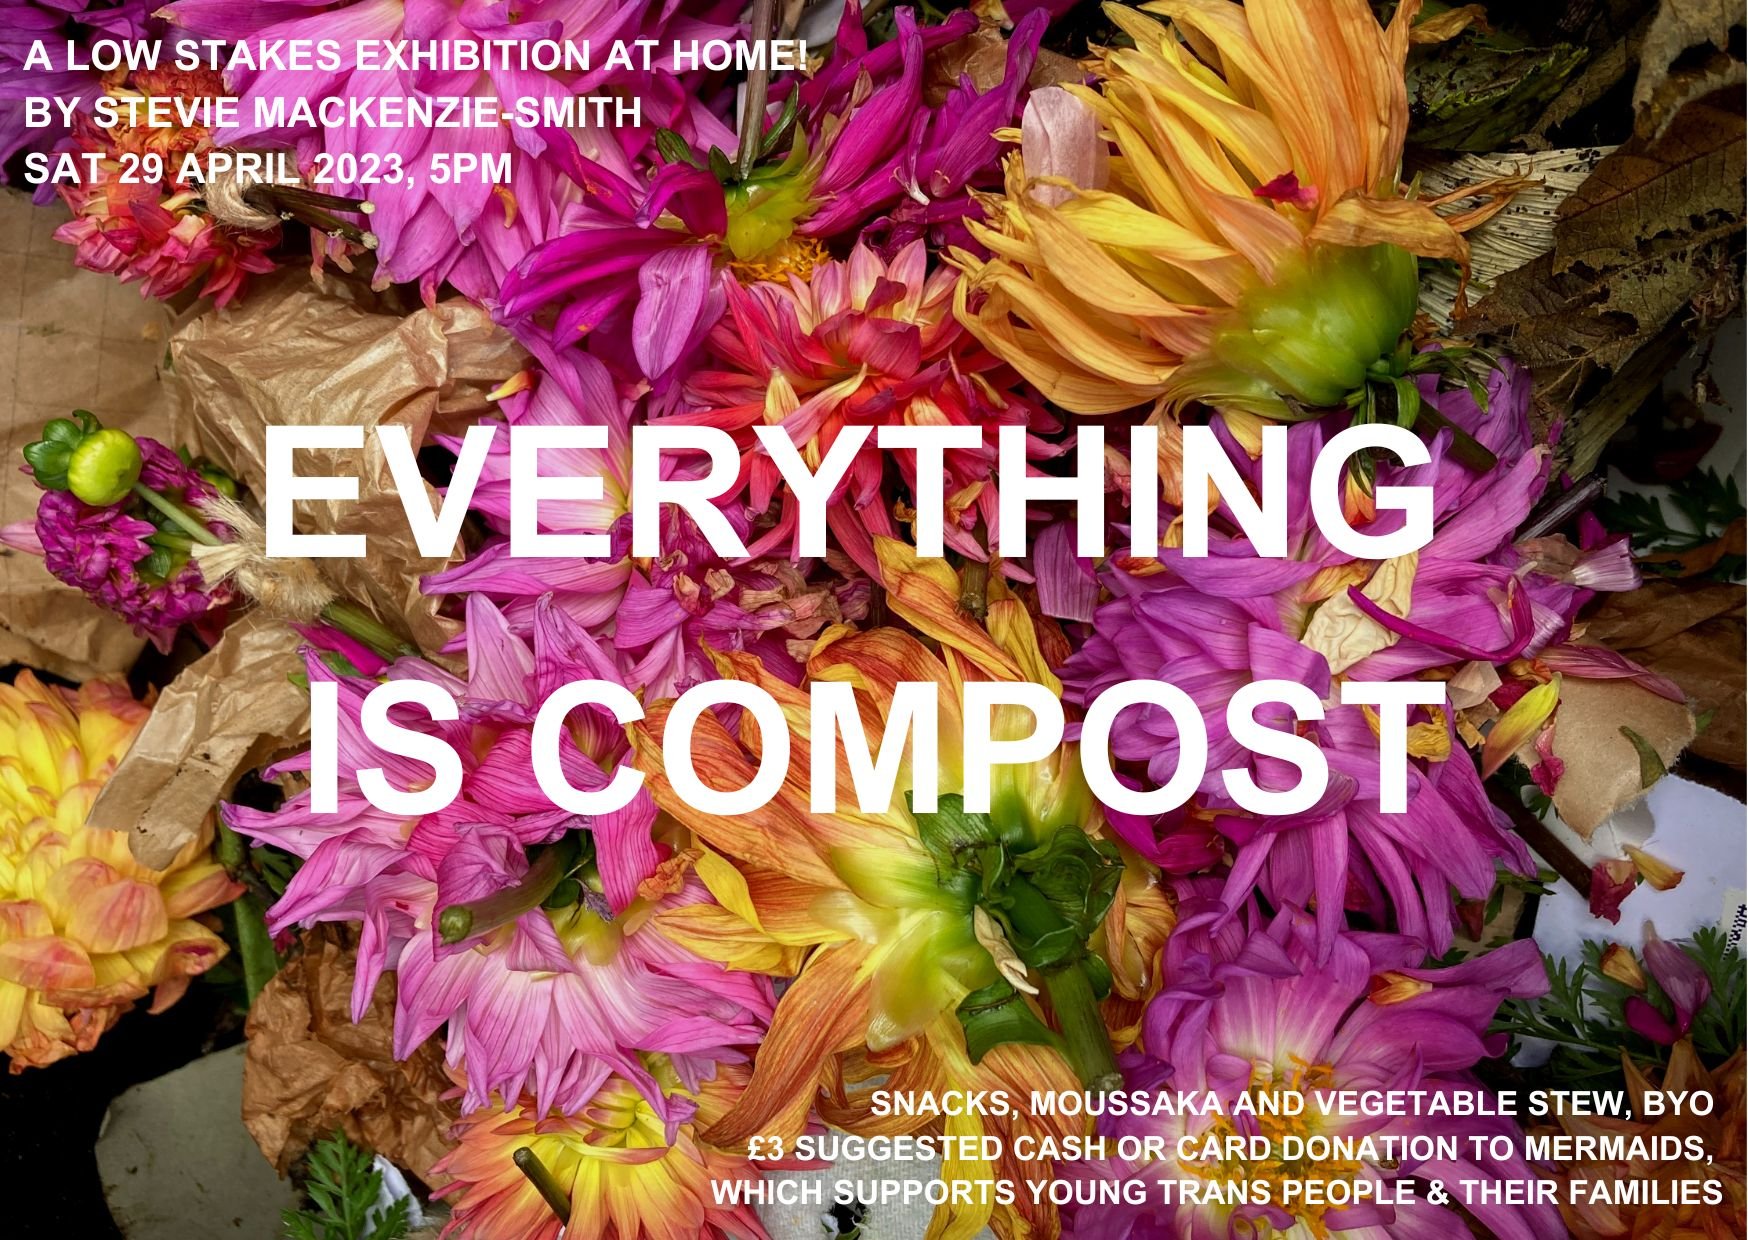 EVERYTHING IS COMPOST EXHIB INVITE.jpg